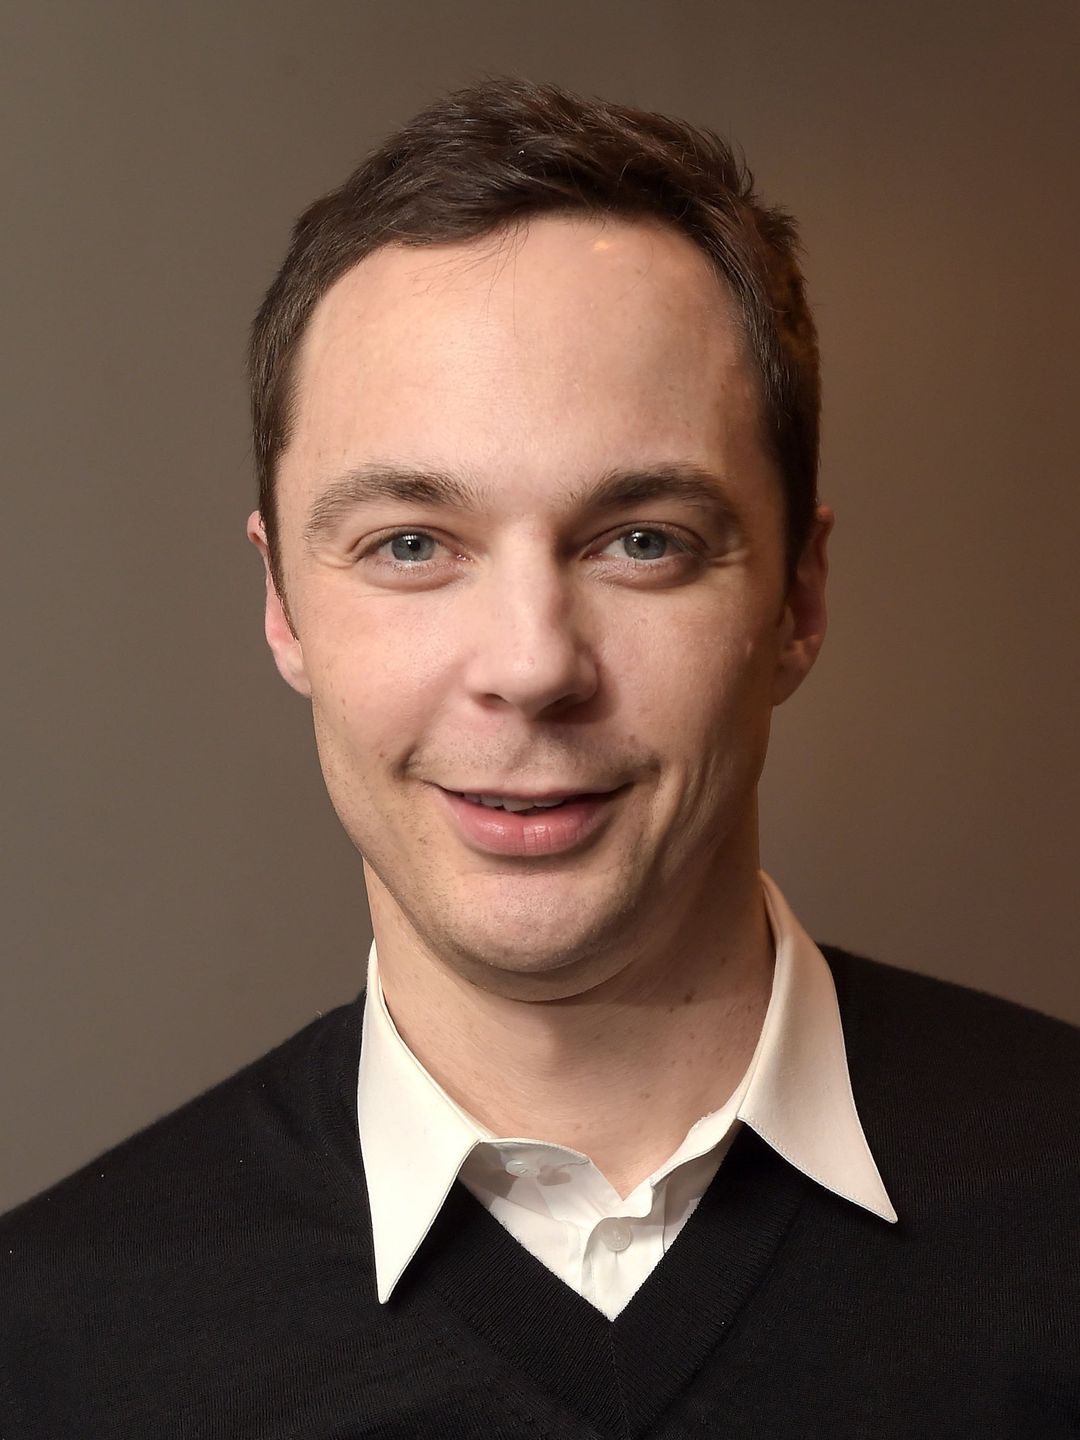 Jim Parsons who is his mother